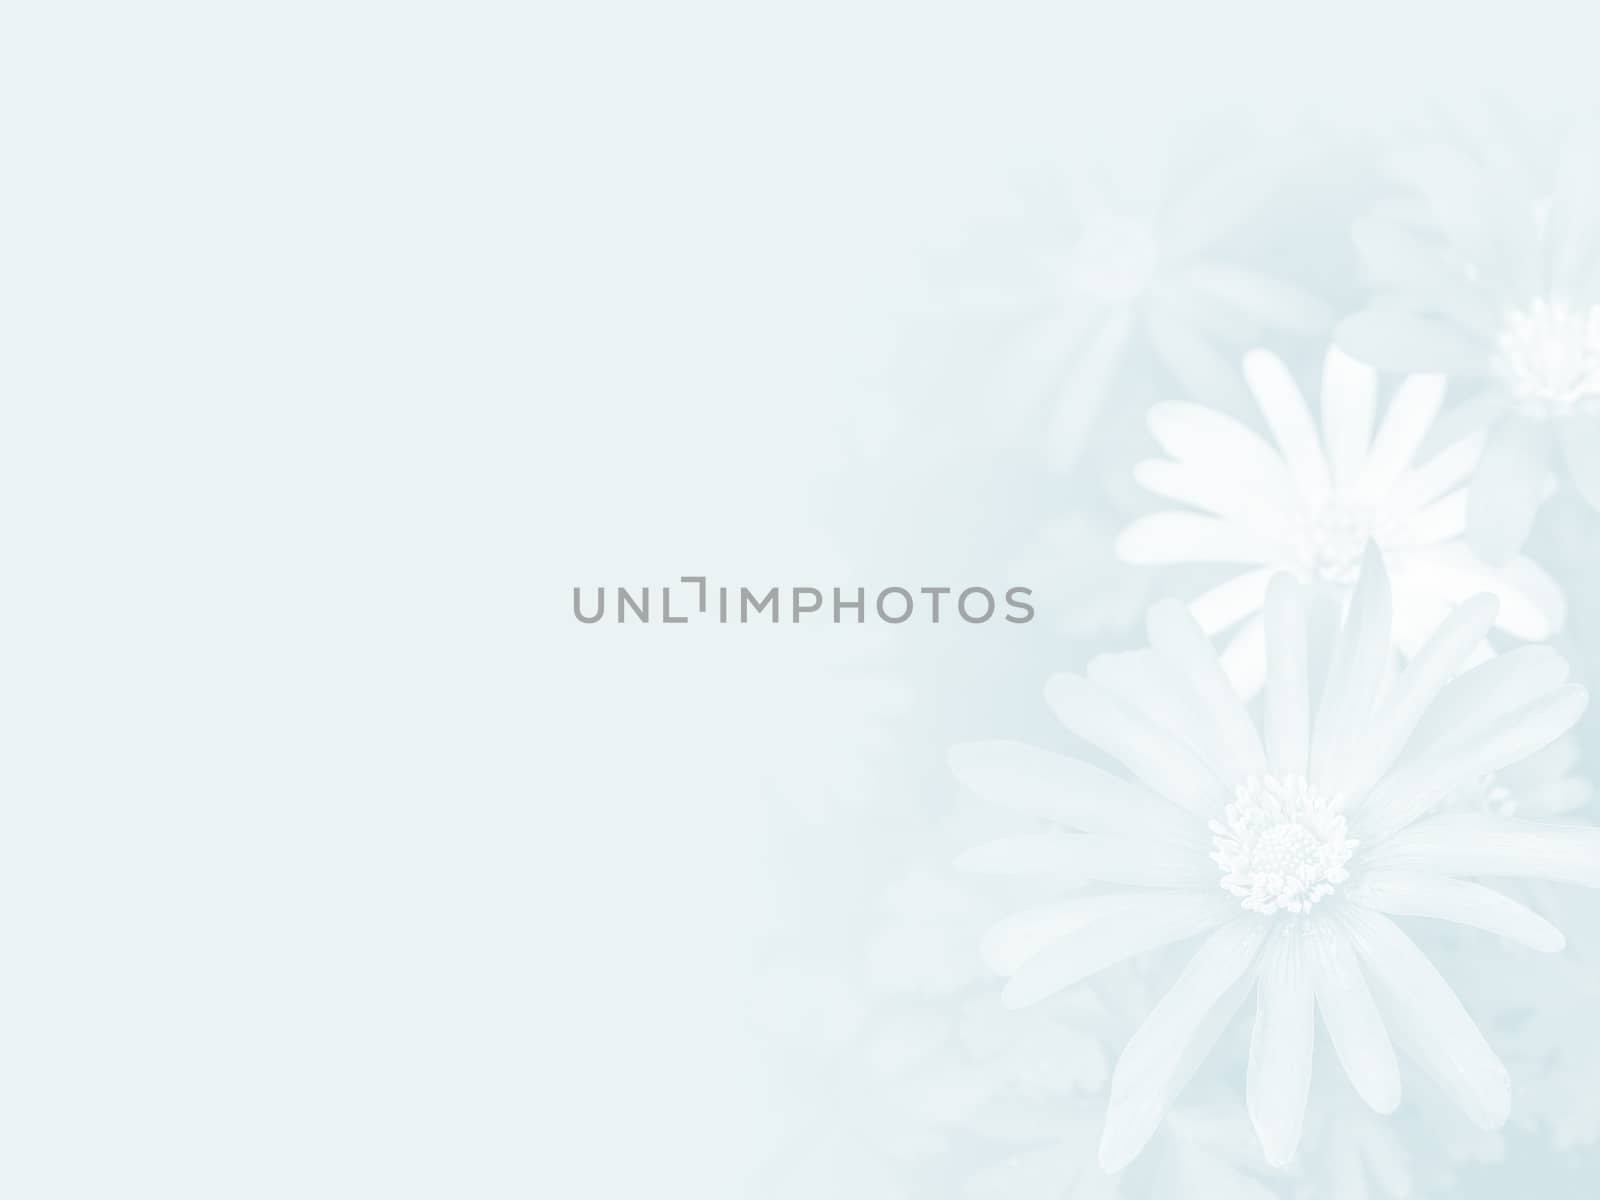 Flowers of Italian Asters, Michaelmas Daisy  made as abstract flower background illustration.